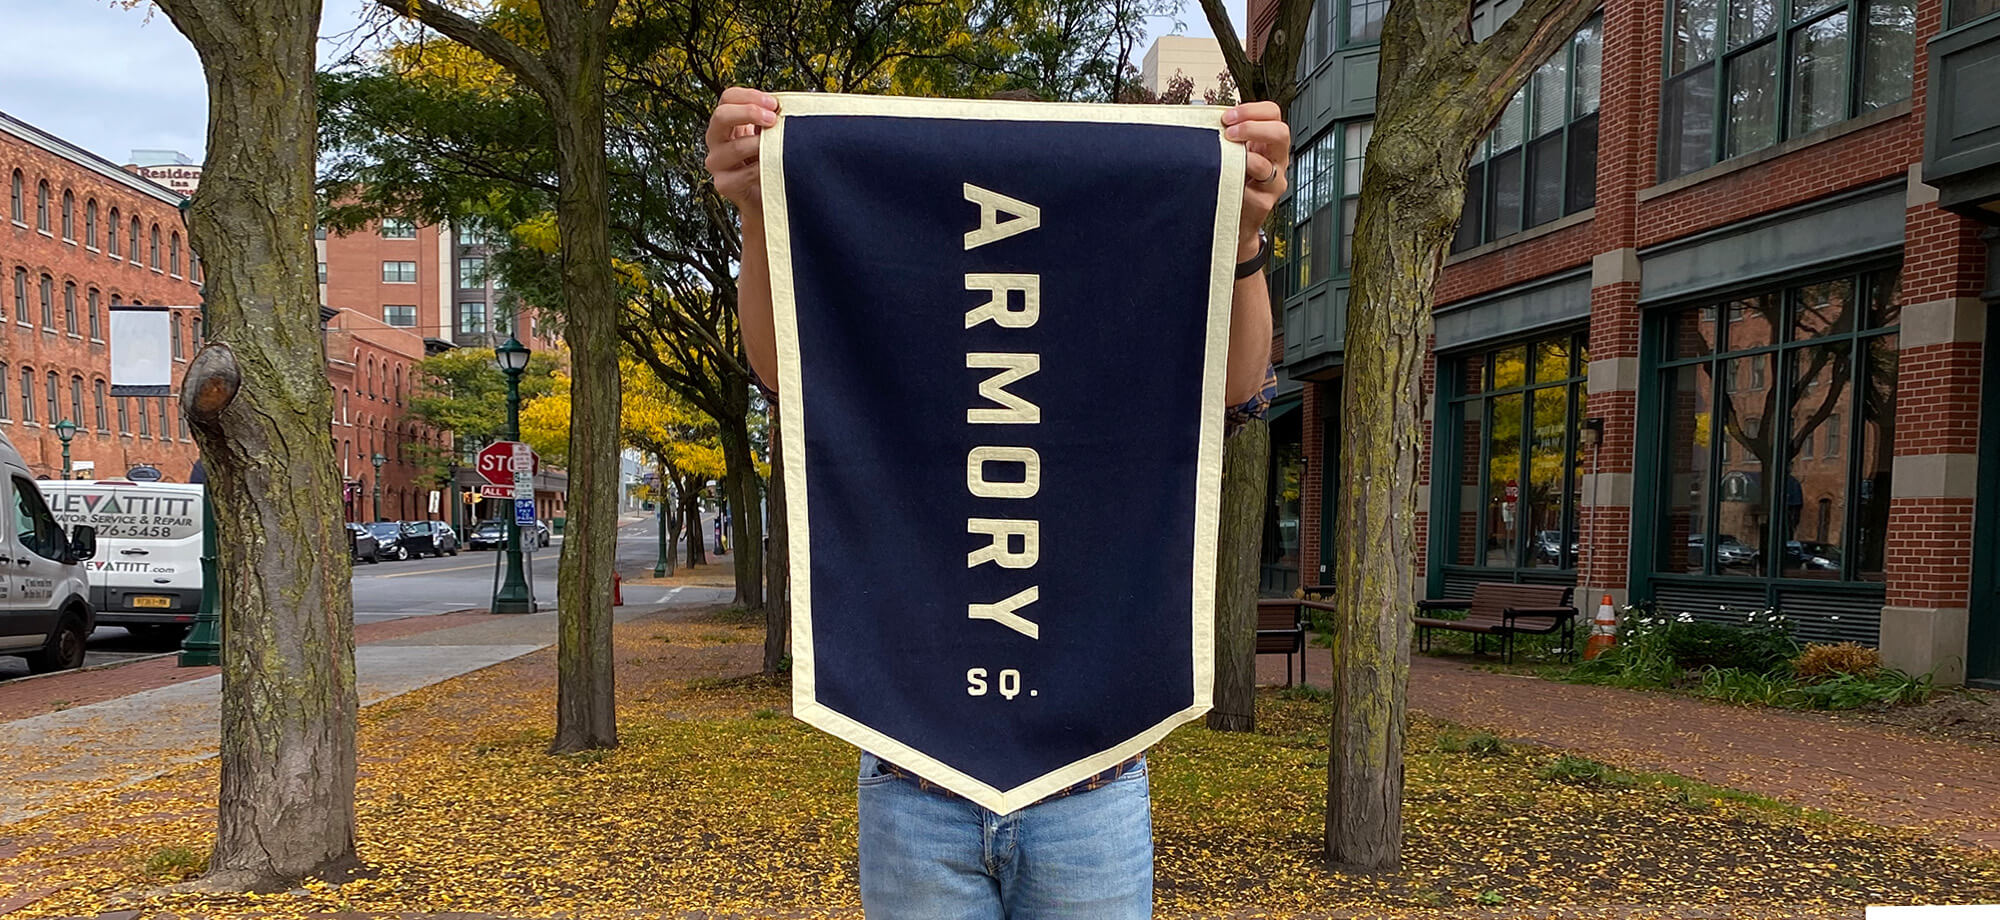 a large blue flag that says “Armory Sq.” being held up outdoors in the fall